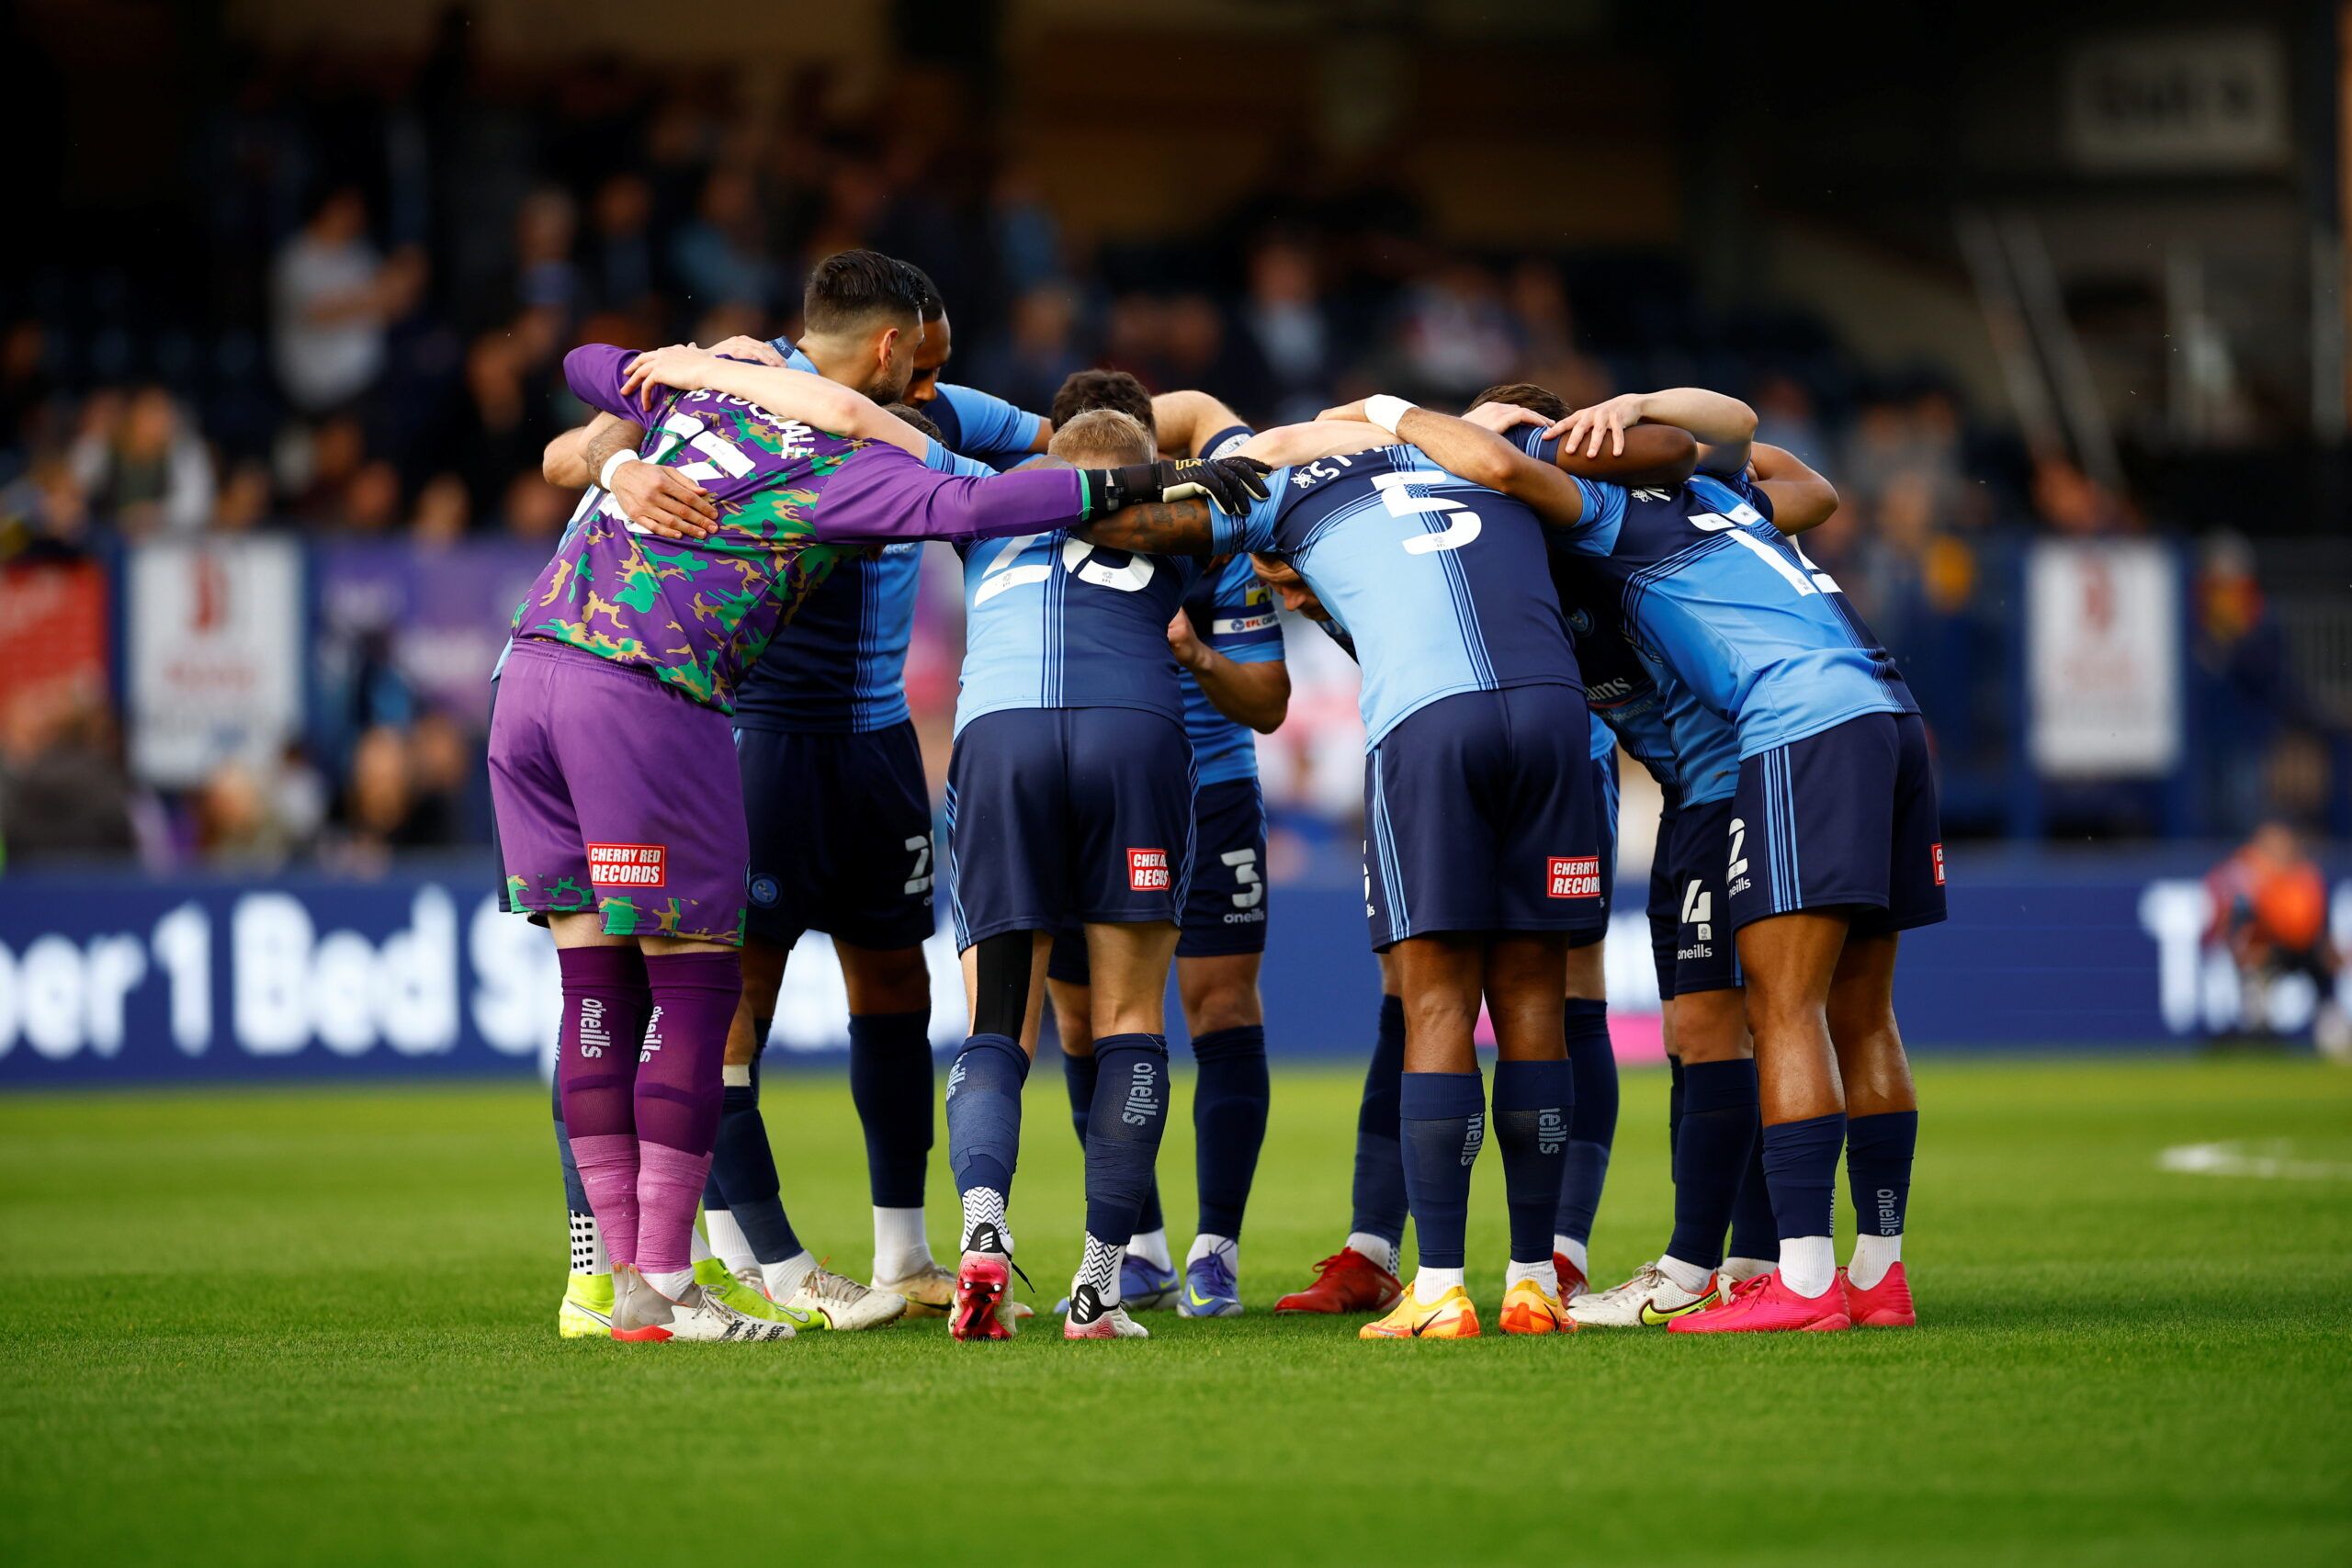 Soccer Football - League One - Play-Off Semi Final - First Leg - Wycombe Wanderers v Milton Keynes Dons - Adams Park, High Wycombe, Britain - May 5, 2022 Wycombe Wanderers' team huddle before the match Action Images/Andrew Boyers  EDITORIAL USE ONLY. No use with unauthorized audio, video, data, fixture lists, club/league logos or 